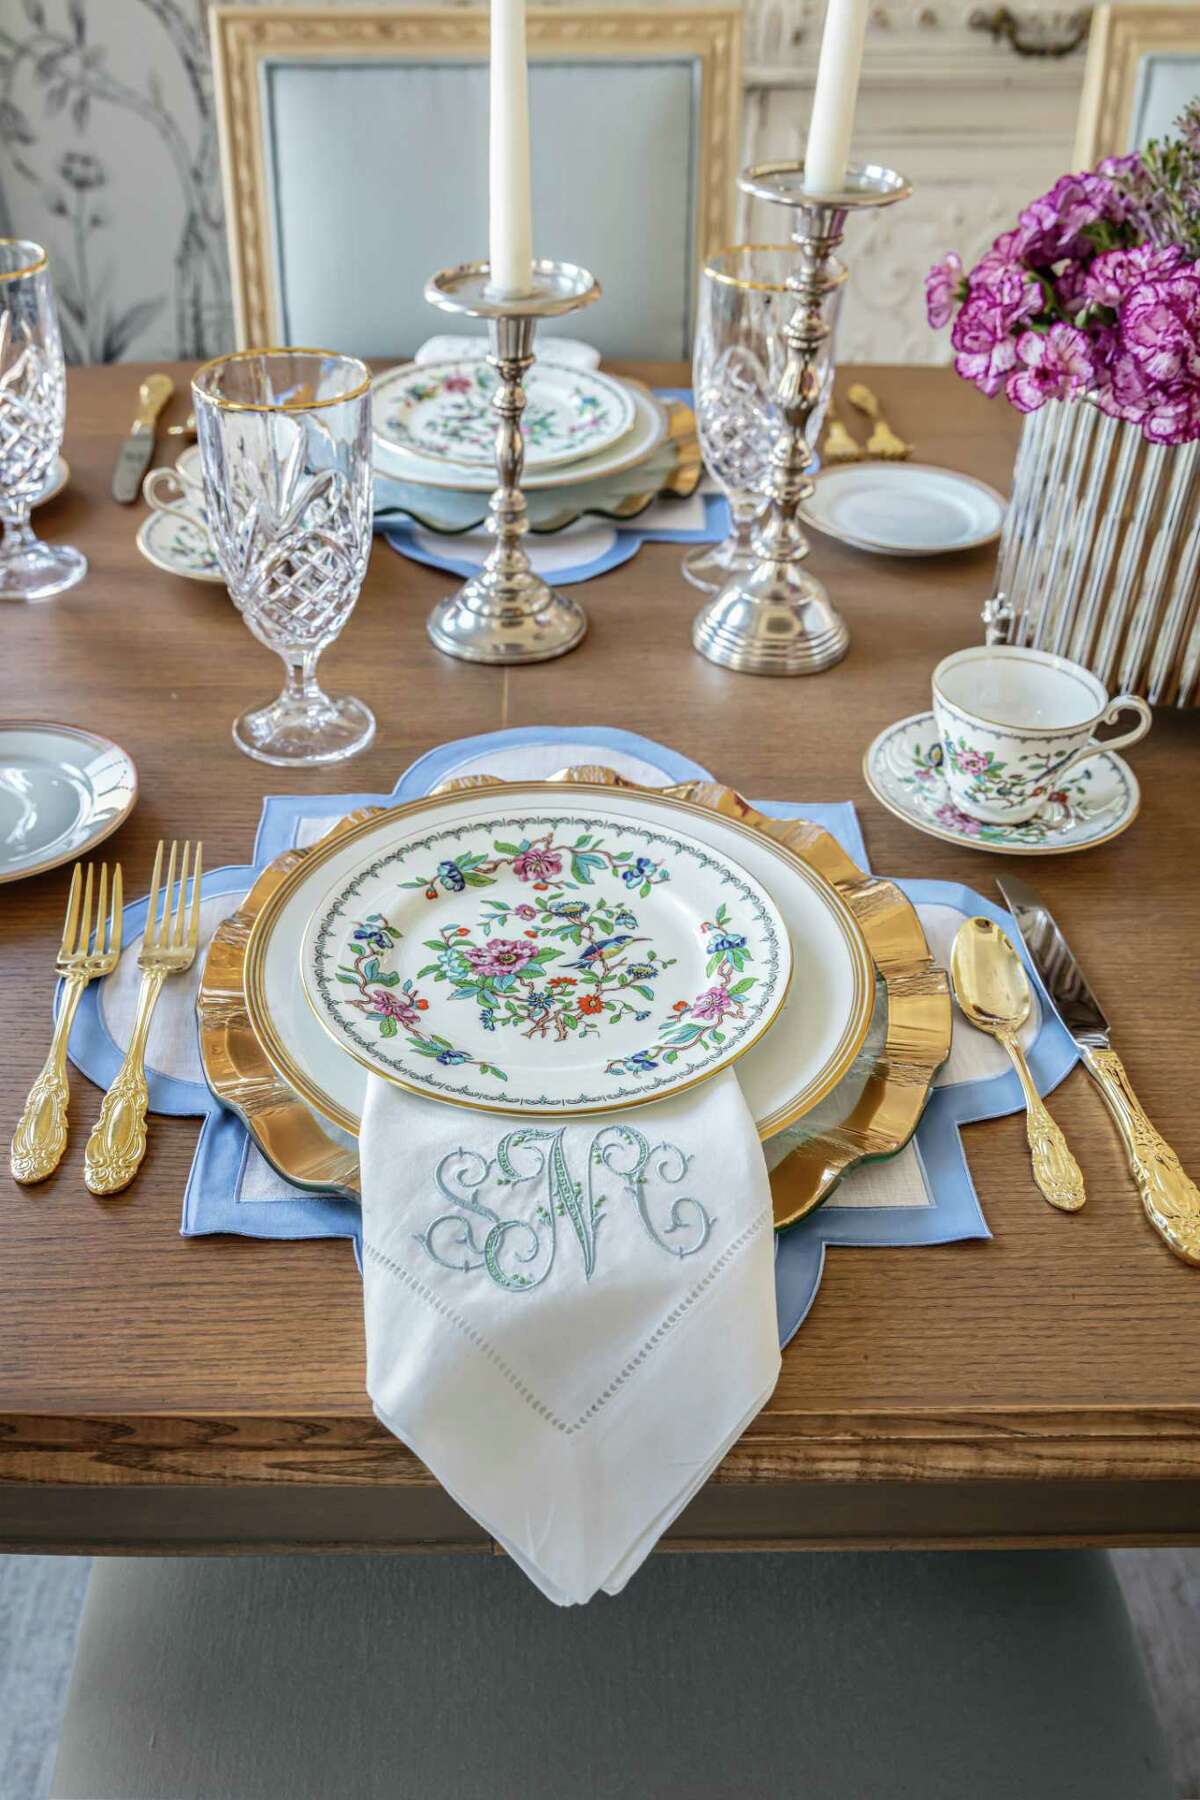 Neal's dining table is set with Aynsley's Pembroke fine china pattern.